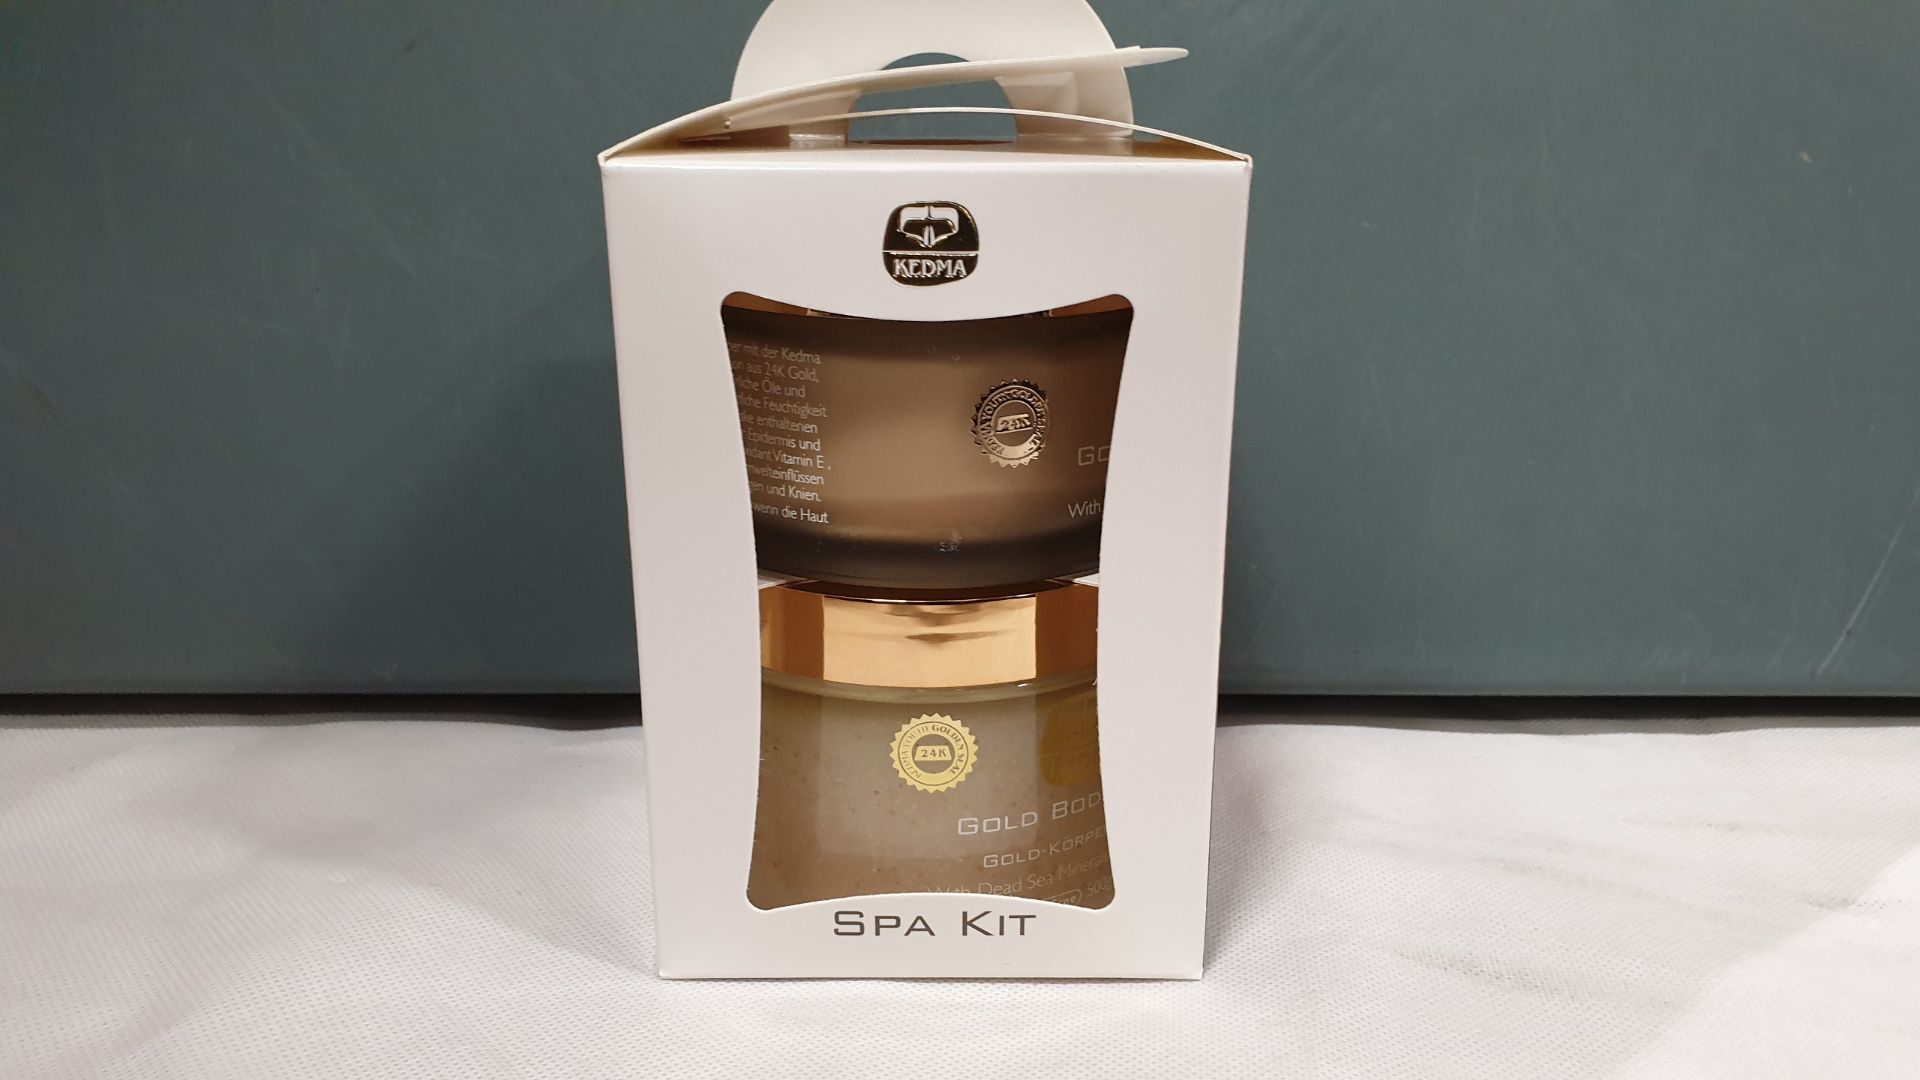 3 X BRAND NEW KEDMA SPA KIT CONTAINING 200G GOLD BODY BUTTER WITH DEAD SEA MINERALS AND SHEA